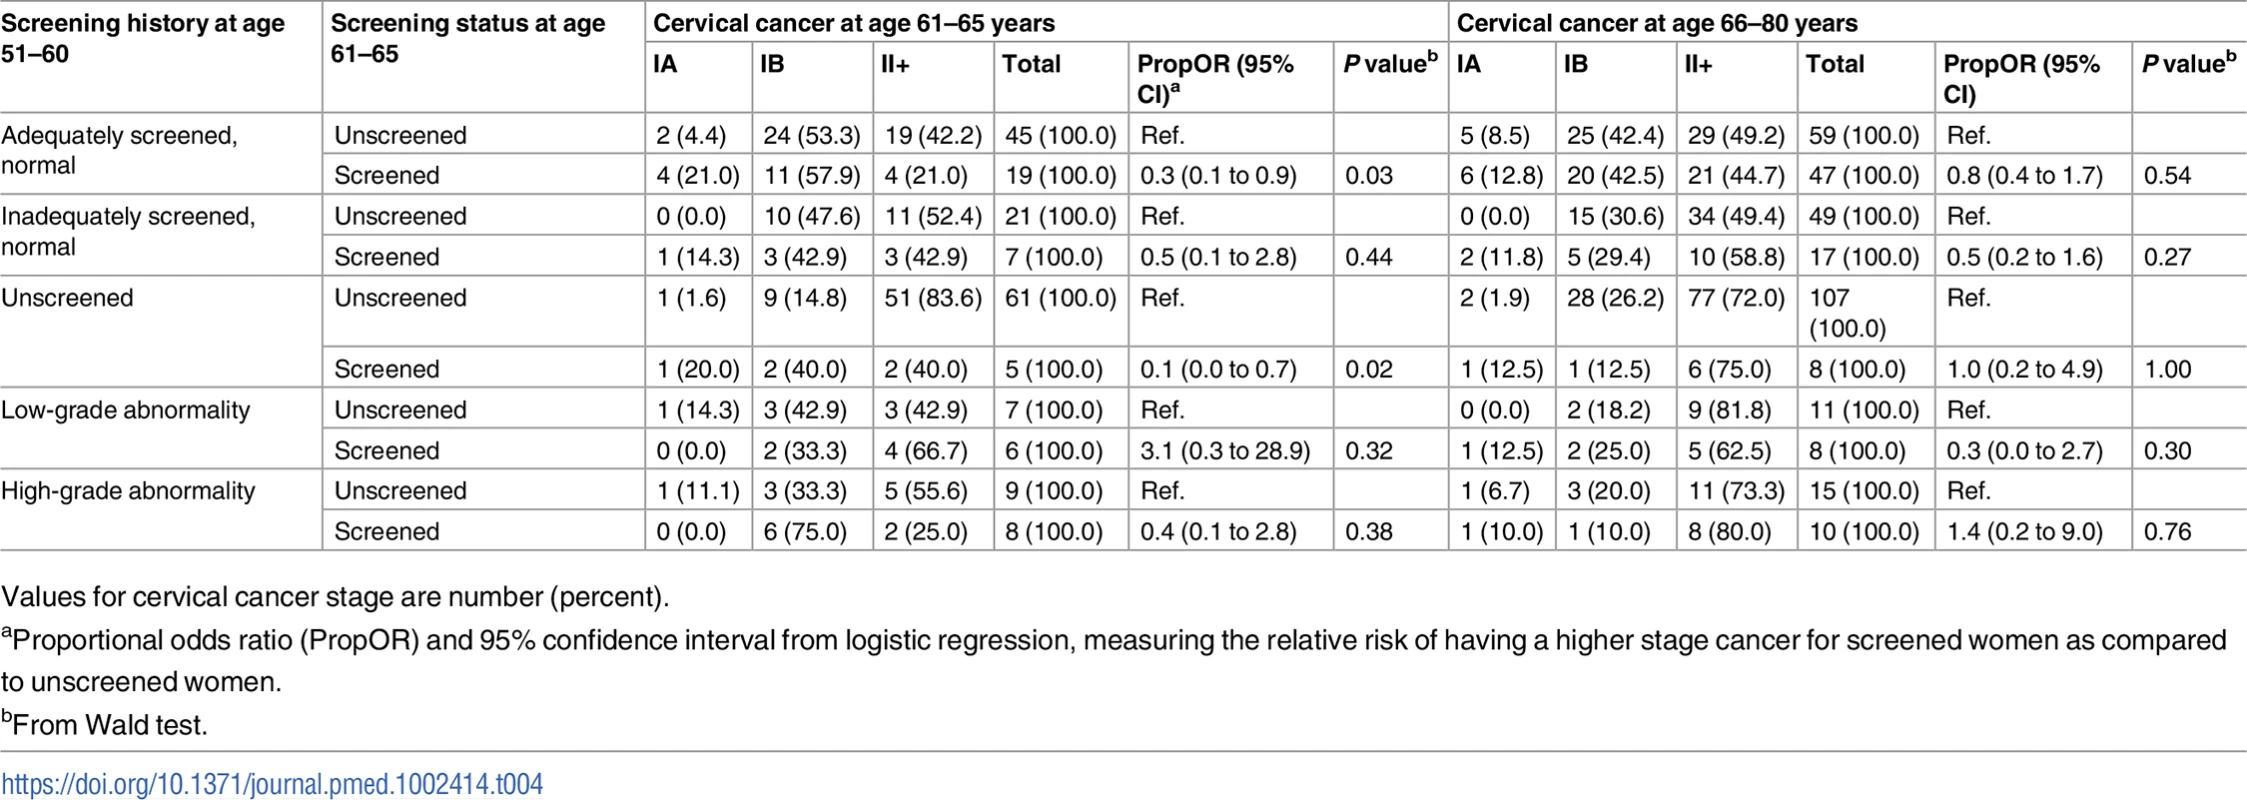 Stage distribution of cervical cancer at age 61–80 (diagnosed in 2002–2011) among women screened and unscreened at age 61–65, by screening history at age 51–60.